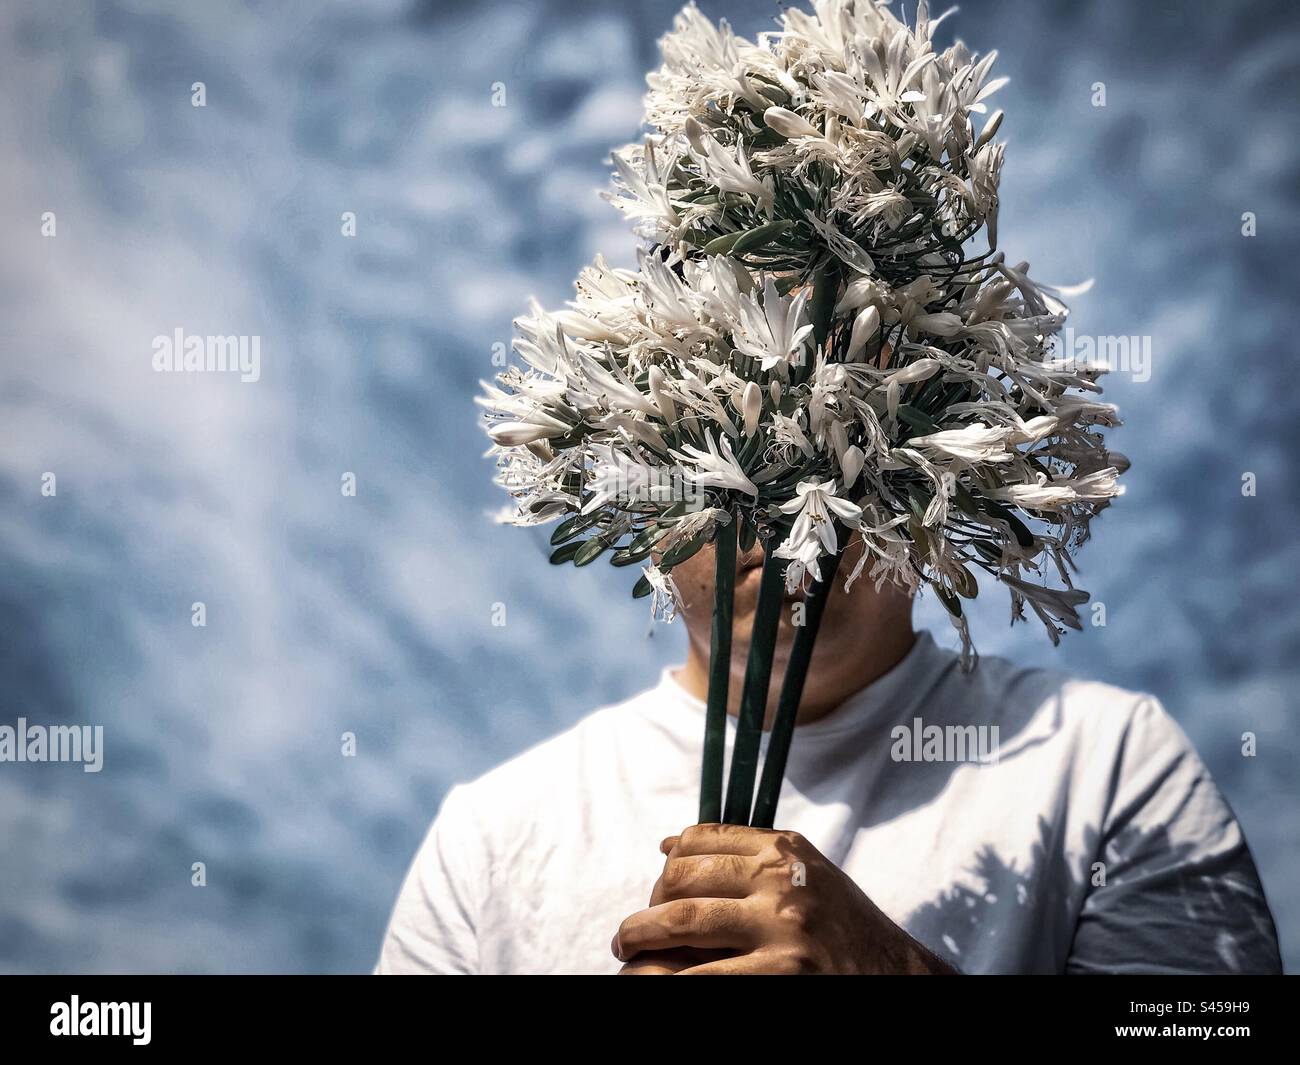 Portrait of young man in white T-shirt holding a bouquet of white Agapanthus africanus flowers aka African lily, Lily of the Nile against cloudy blue sky. Obscured face. Fashion. Spring theme. Stock Photo